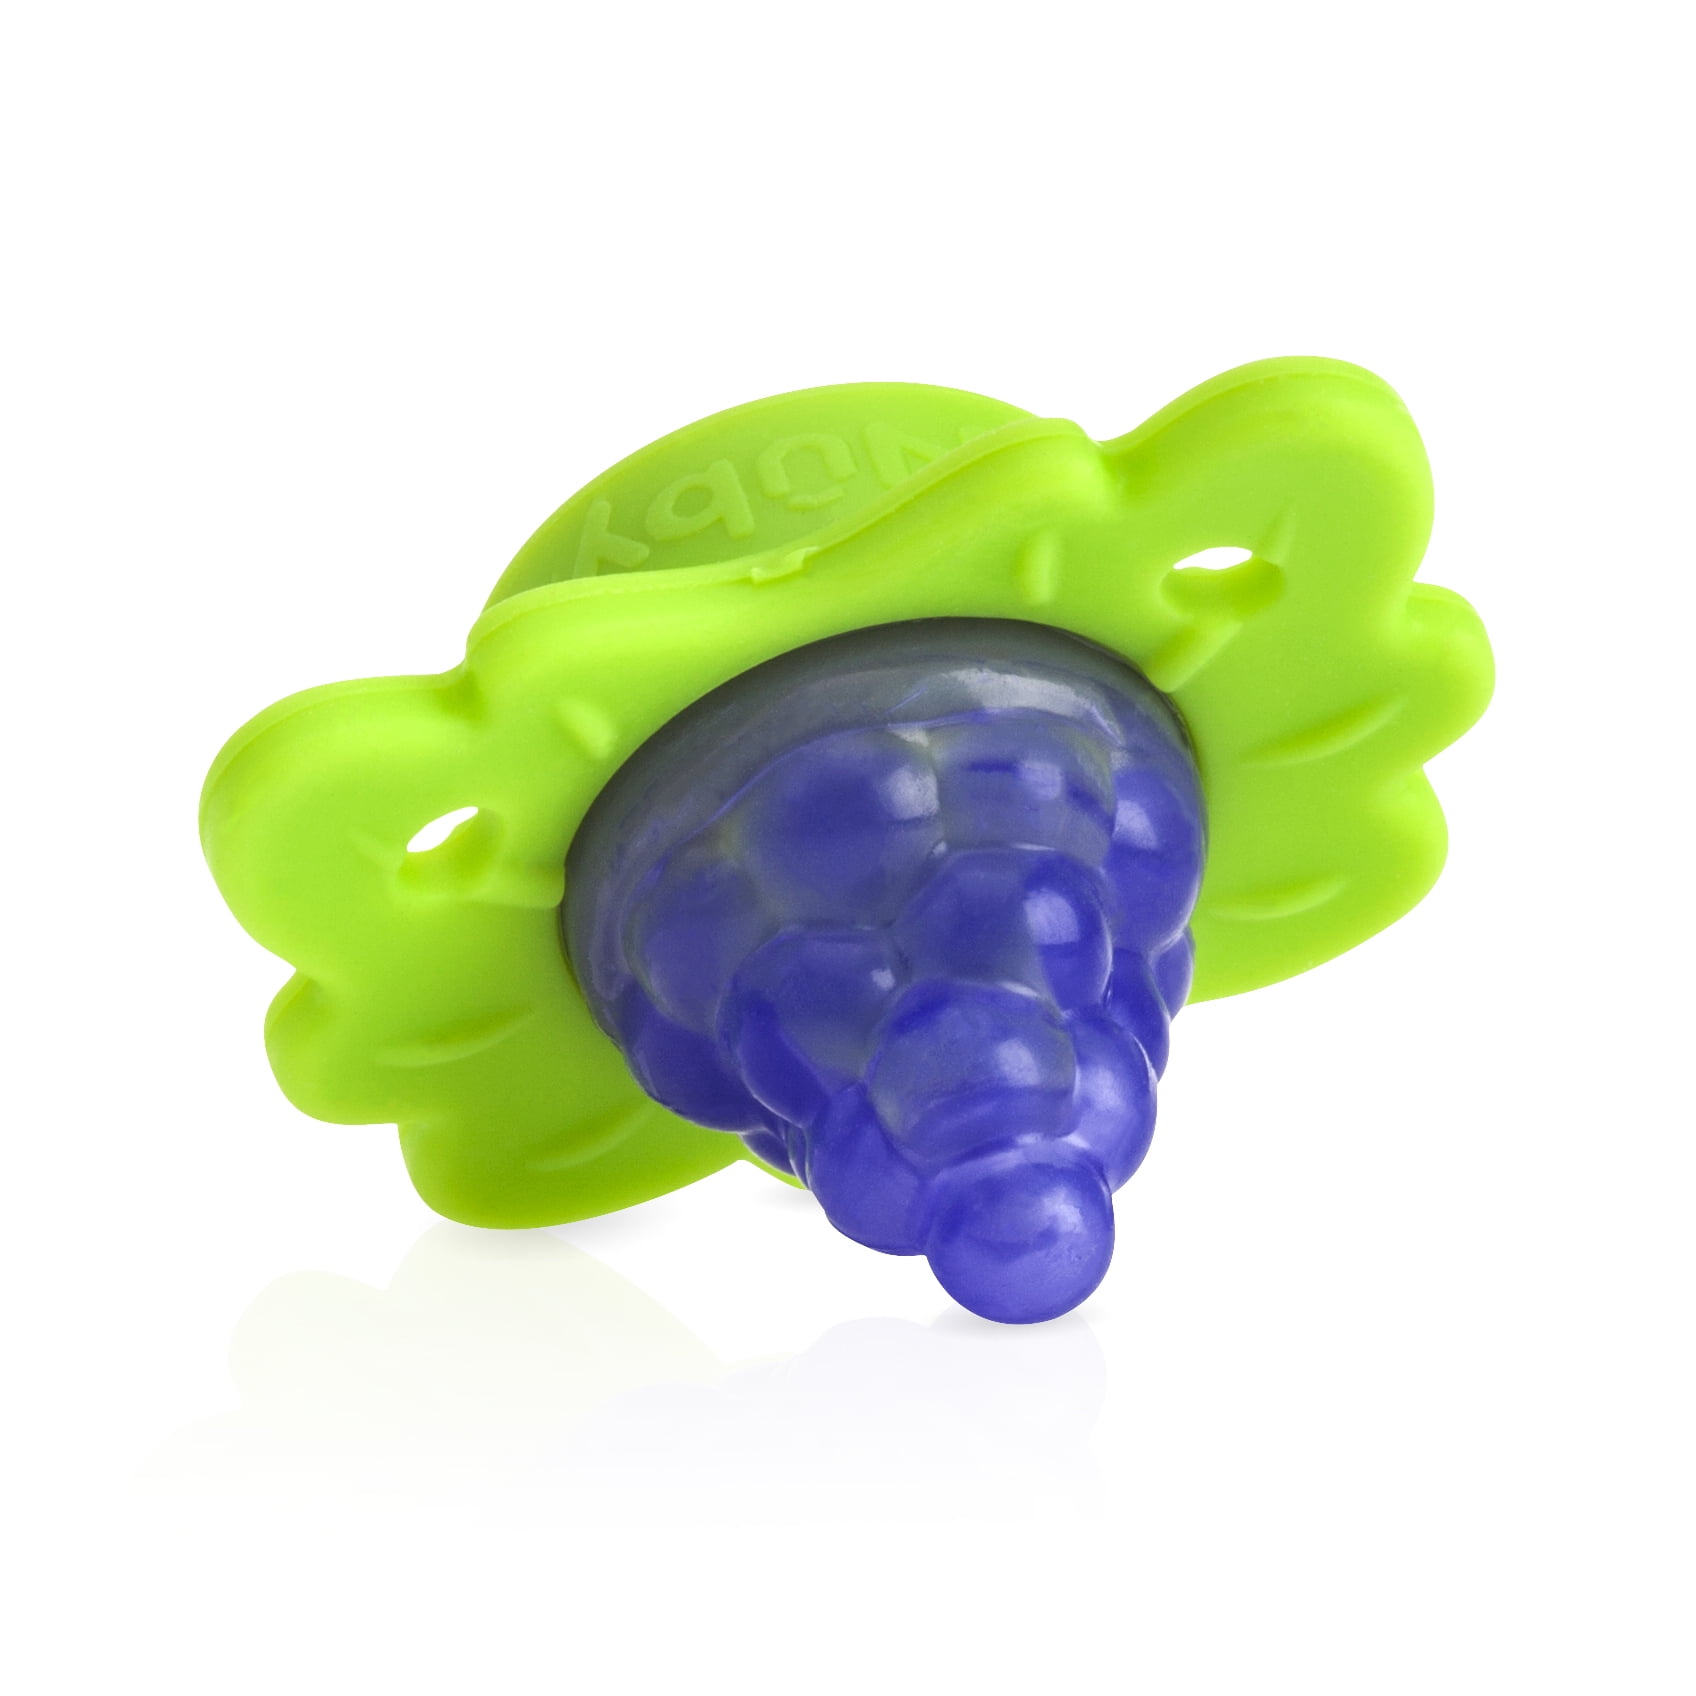 nuby vibrating teether